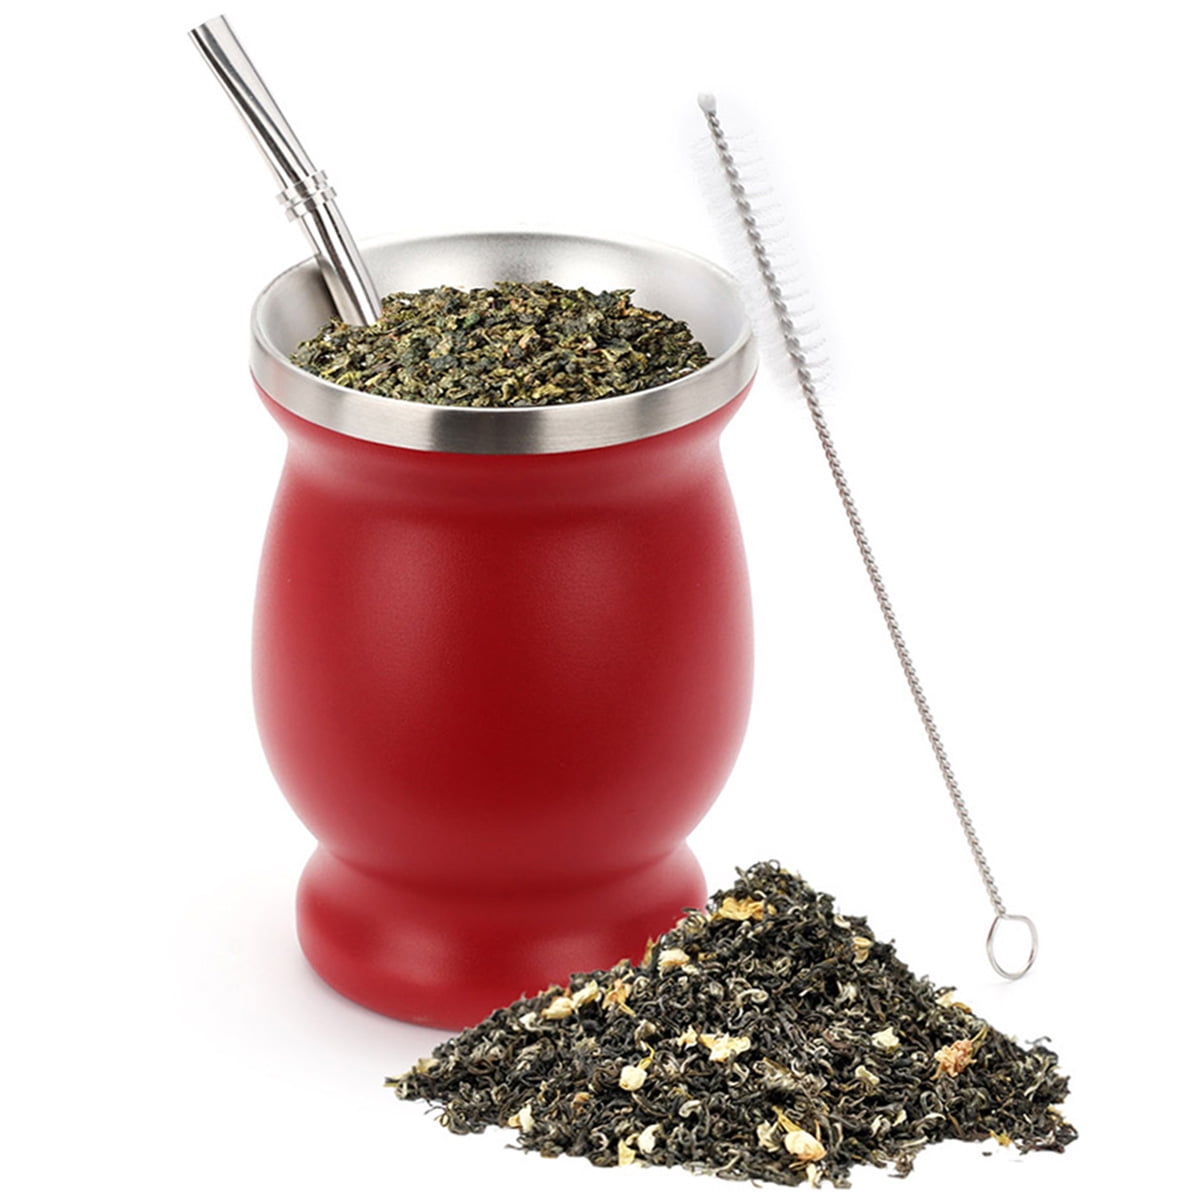 Novomates New Yerba Mate Gourd 8oz (237ml) - Best Yerba Mate Set - Double Wall Stainless Steel Yerba Mate Cup with Stainless Steel Mate Bombilla Straw